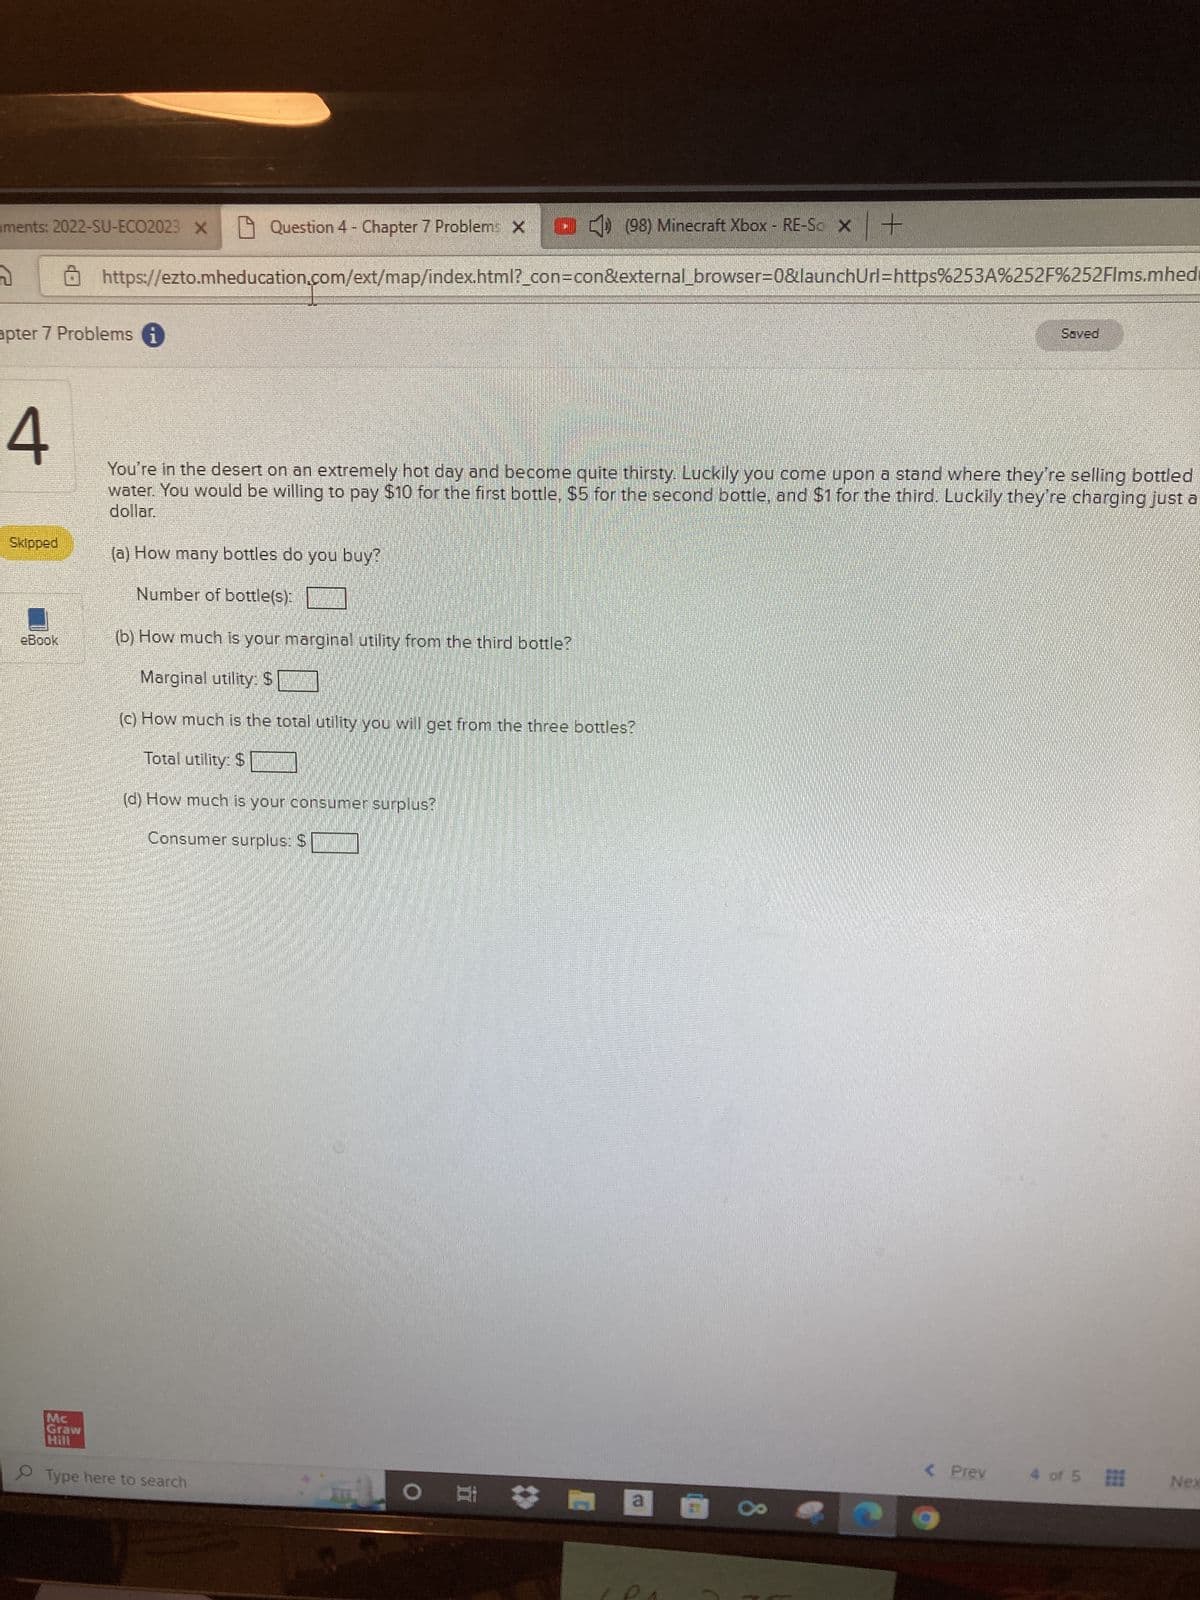 iments: 2022-SU-ECO2023 X
n
apter 7 Problems i
4
Question 4 - Chapter 7 Problem: (98) Minecraft Xbox - RE-So x +
https://ezto.mheducation.com/ext/map/index.html?_con=con&external_browser=0&launchUrl=https%253A%252F%252Flms.mhedi
Skipped
eBook
You're in the desert on an extremely hot day and become quite thirsty. Luckily you come upon a stand where they're selling bottled
water. You would be willing to pay $10 for the first bottle, $5 for the second bottle, and $1 for the third. Luckily they're charging just a
dollar.
(a) How many bottles do you buy?
Number of bottle(s):
(b) How much is your marginal utility from the third bottle?
Marginal utility: $
(c) How much is the total utility you will get from the three bottles?
Total utility: $
(d) How much is your consumer surplus?
Consumer surplus: $
Mc
Graw
Hill
O Type here to search
O a
Saved
< Prev
4 of 5
Nex